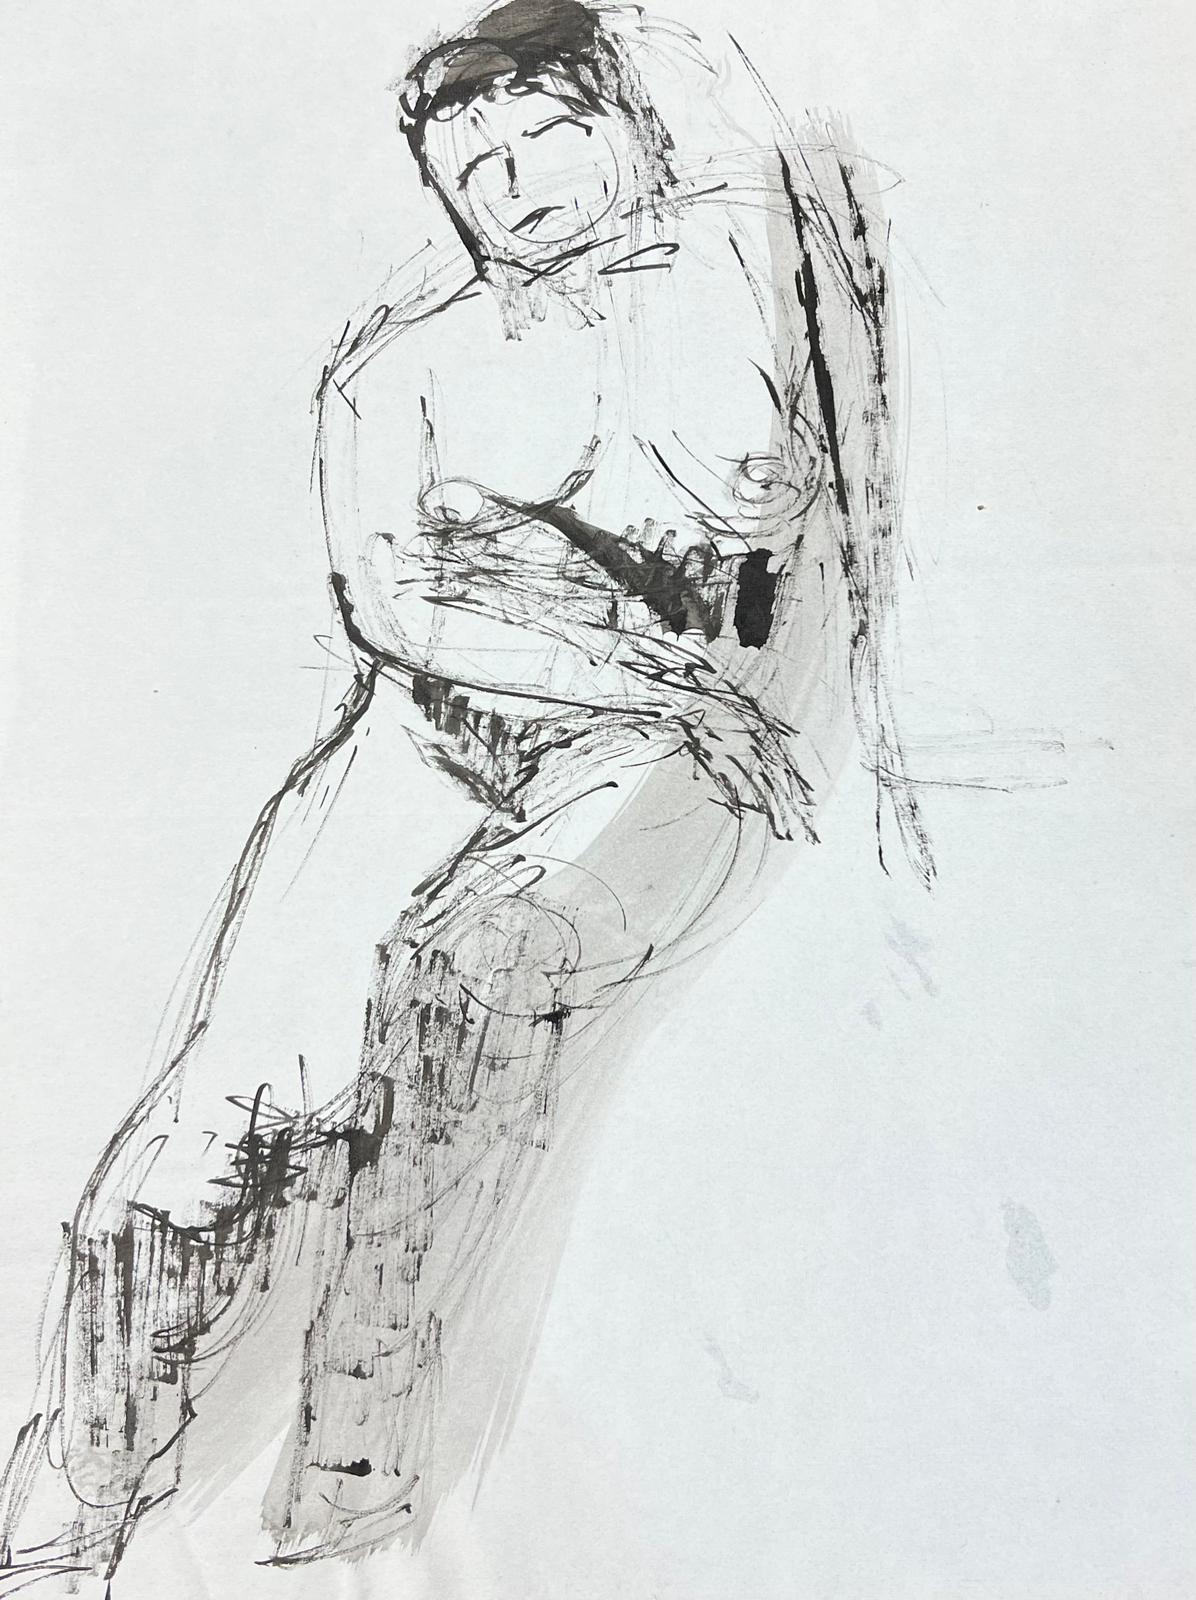 Nude Drawing
by Geneviève Zondervan (French 1922-2013)
charcoal/ink drawing on tracing paper

paper: 12.5 x 9.5 inches

Superb mid-century oil painting on board by the French artist, Geneviève Zondervan (French 1922-2013). The painting has excellent